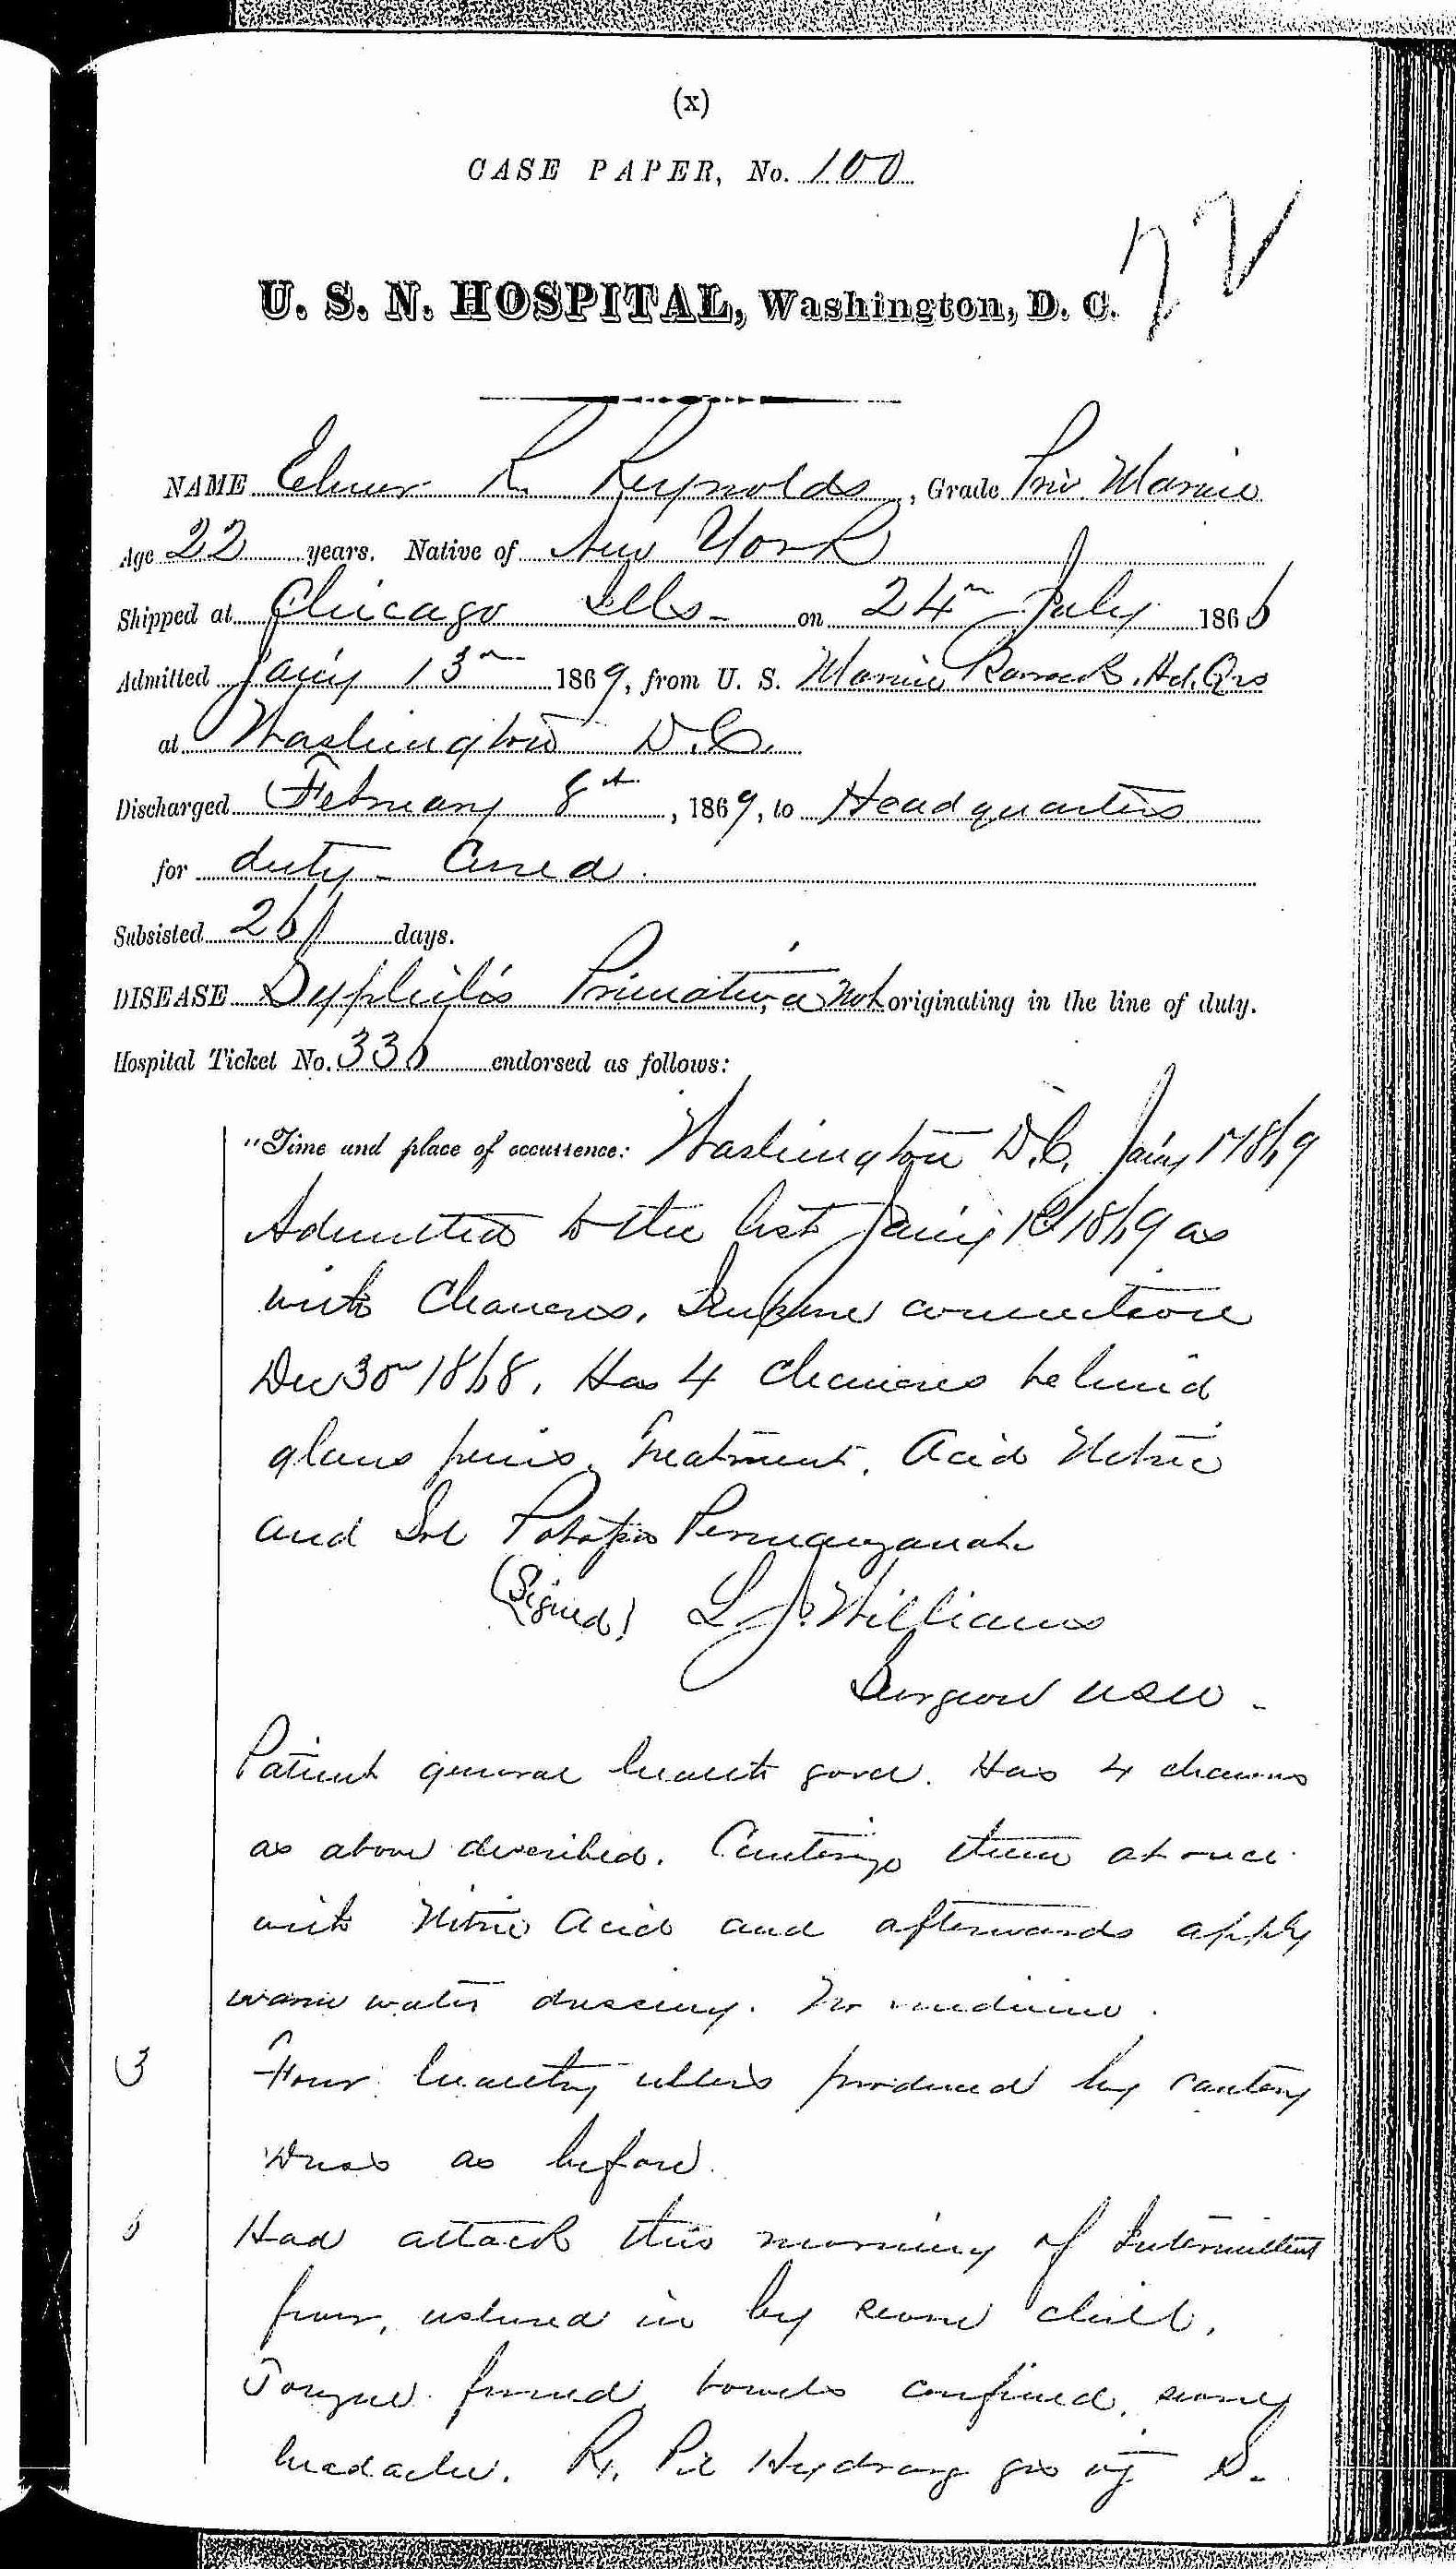 Entry for E. R. Reynolds (page 1 of 2) in the log Hospital Tickets and Case Papers - Naval Hospital - Washington, D.C. - 1868-69